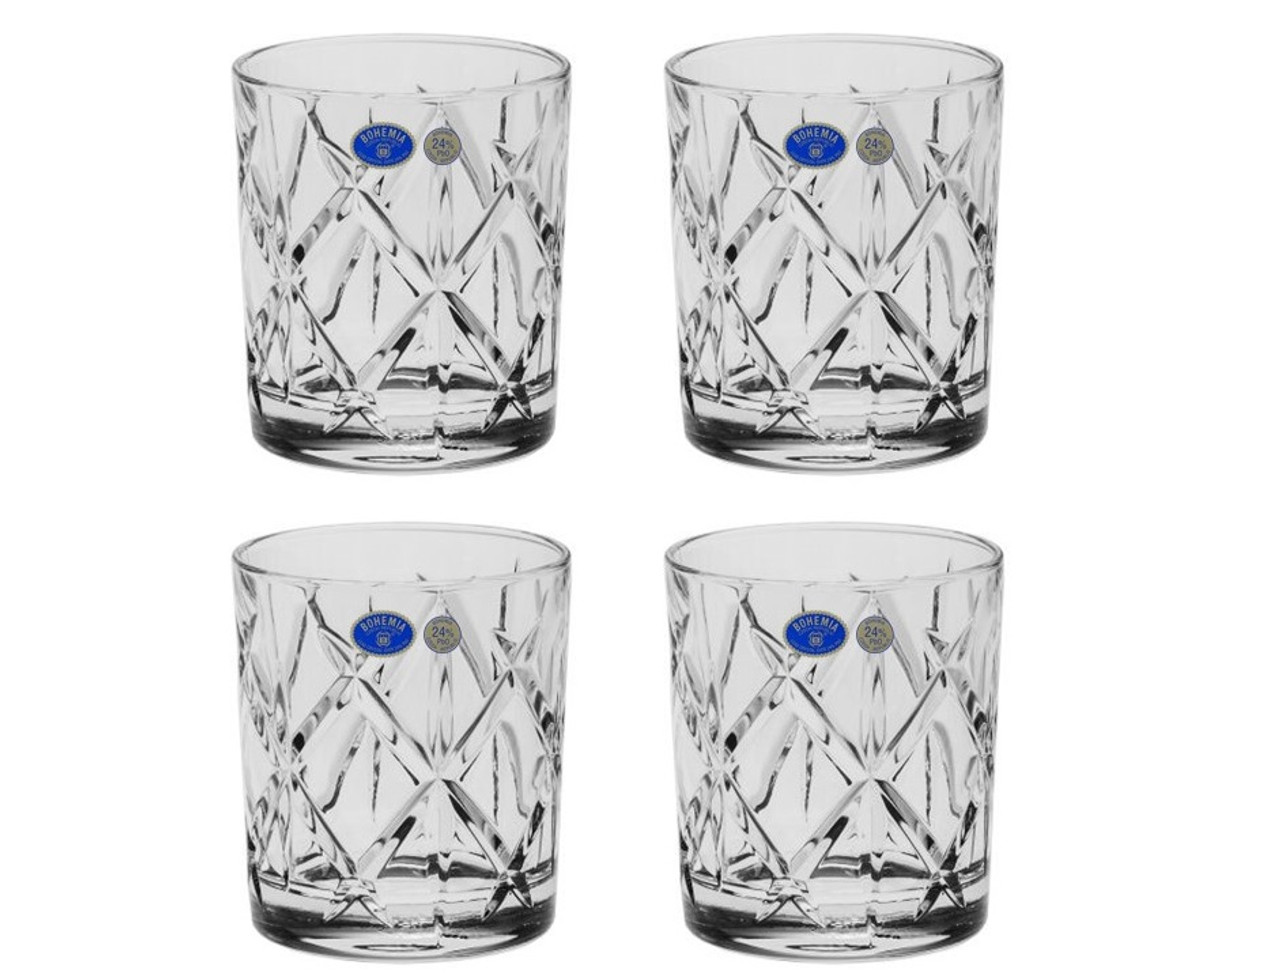 https://cdn11.bigcommerce.com/s-9mnzpxwffi/images/stencil/1280x1280/products/509/2787/Double-Old-Fashioned-Crystal-Glasses-Wedge-Cross-Cut__52453.1703843717.jpg?c=2